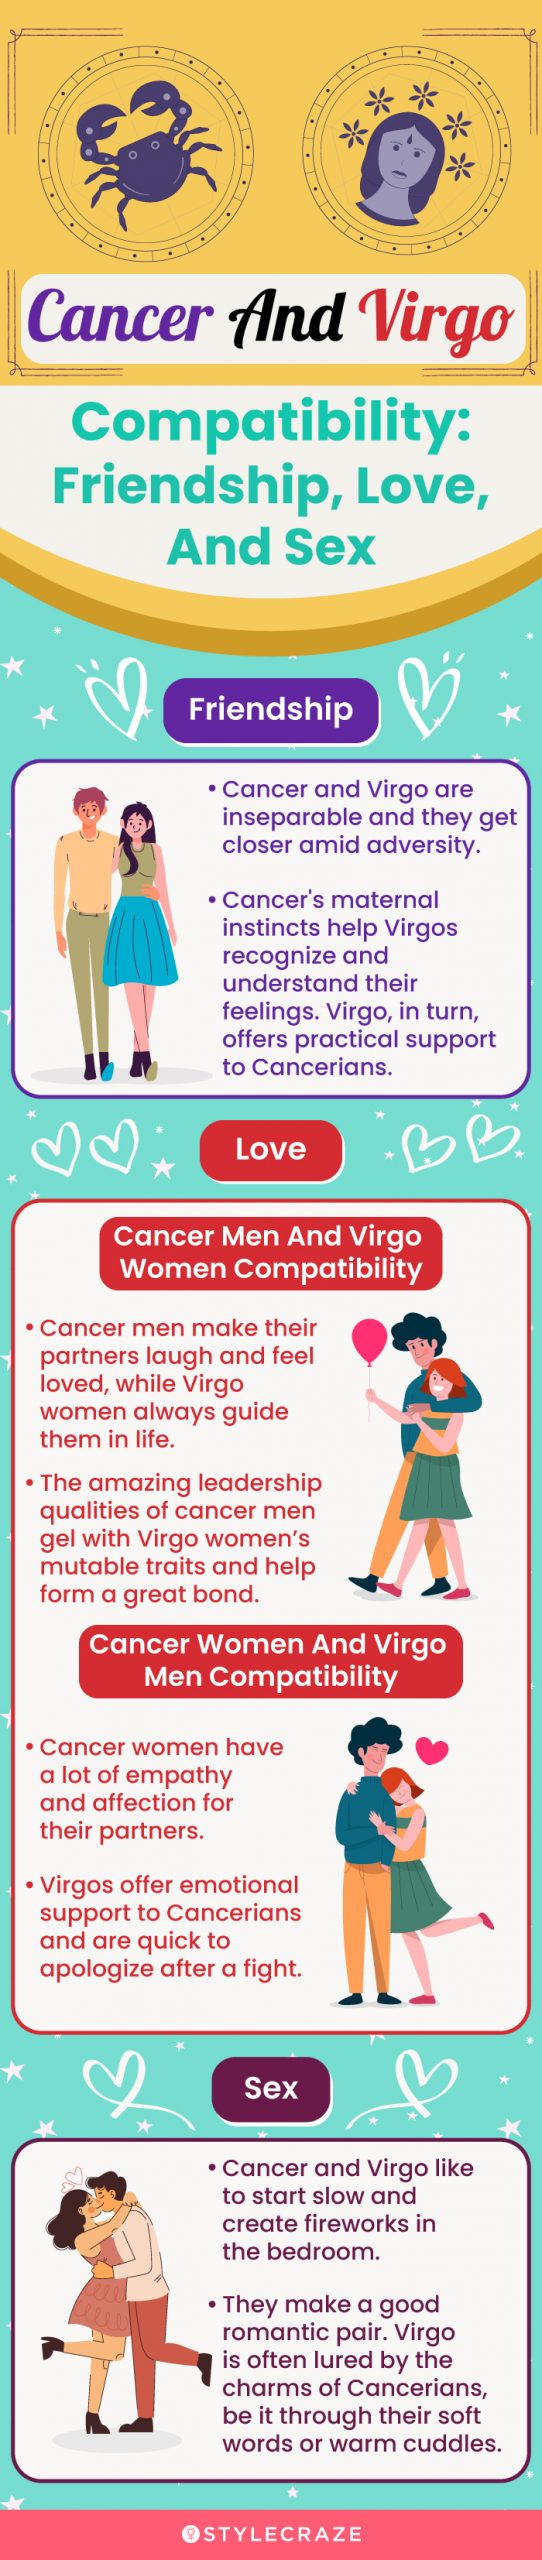 cancer and virgo compatibility: friendship, love and sex (infographic)